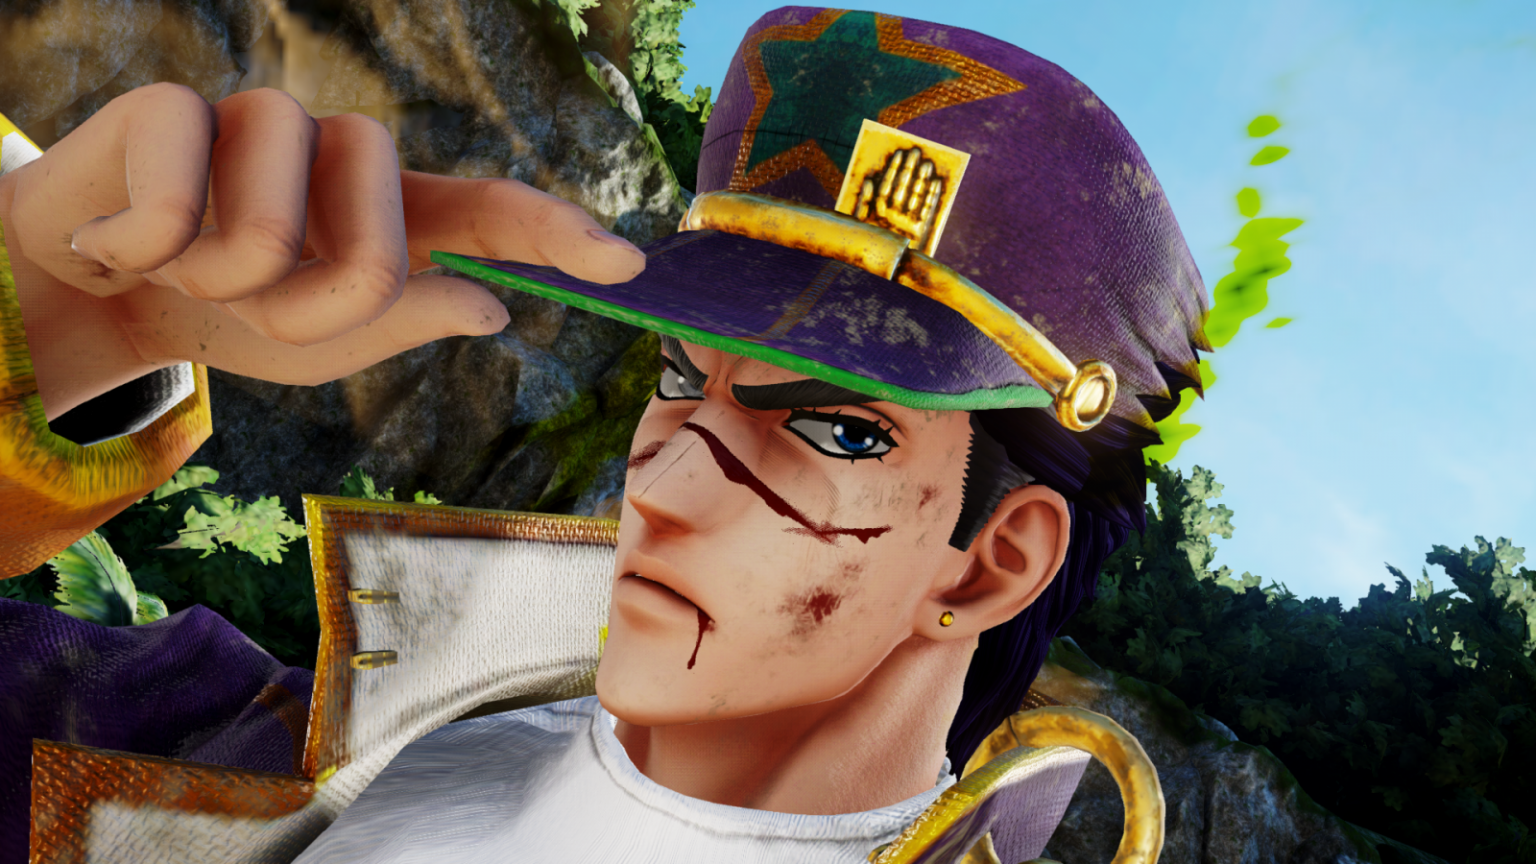 jump force mods xbox one